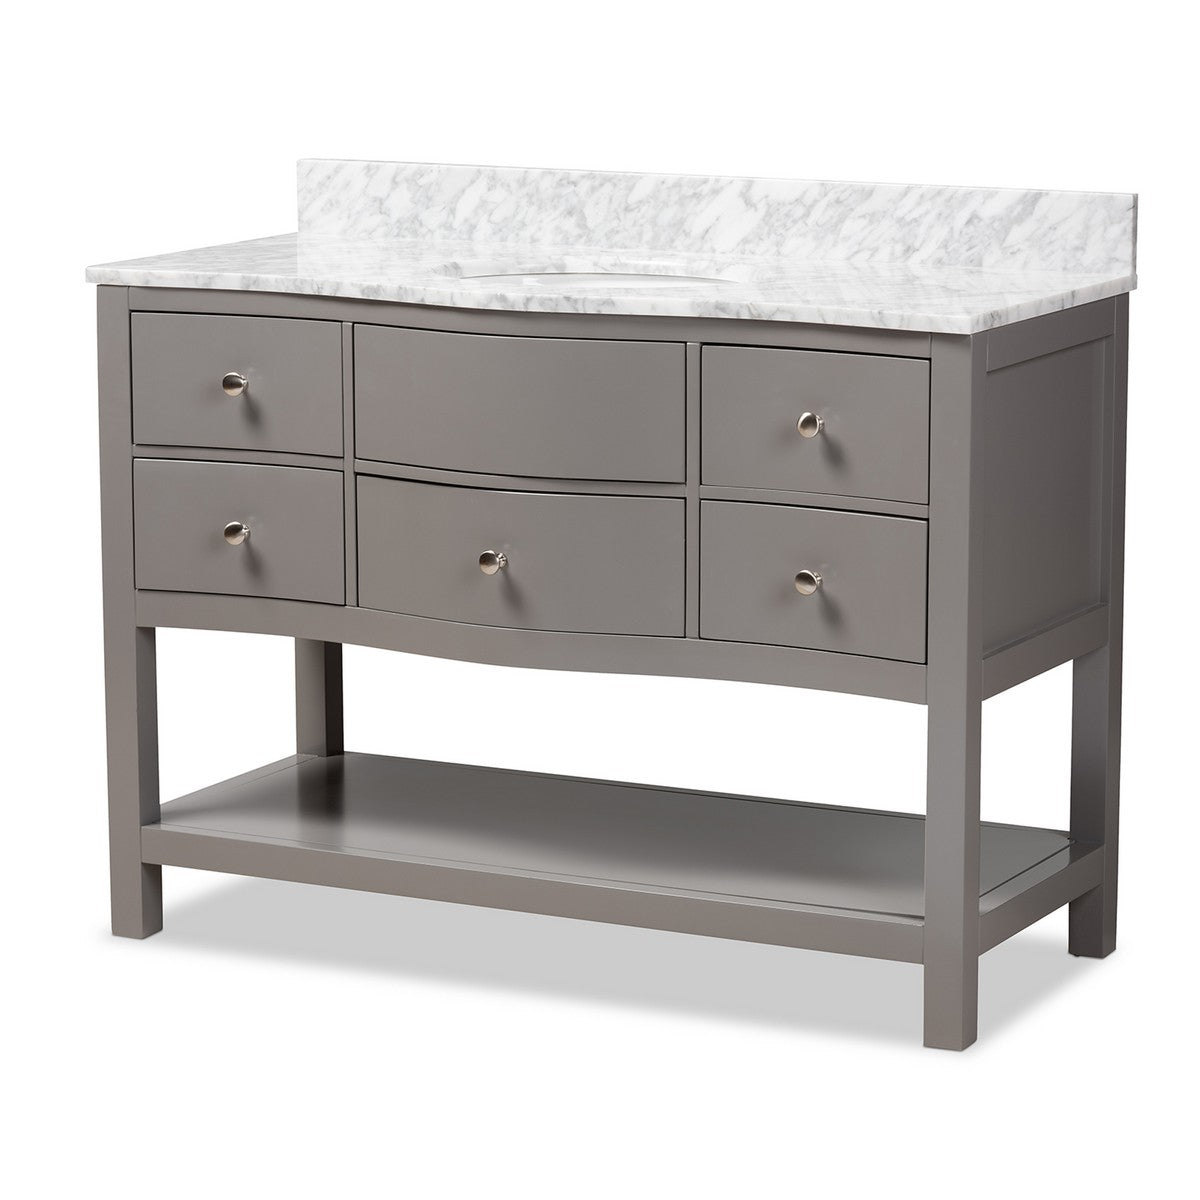 Baxton Studio Castie 48-Inch Modern and Contemporary Grey Finished Wood and Marble Single Sink Bathroom Vanity Baxton Studio-Bathroom Vanities-Minimal And Modern - 1